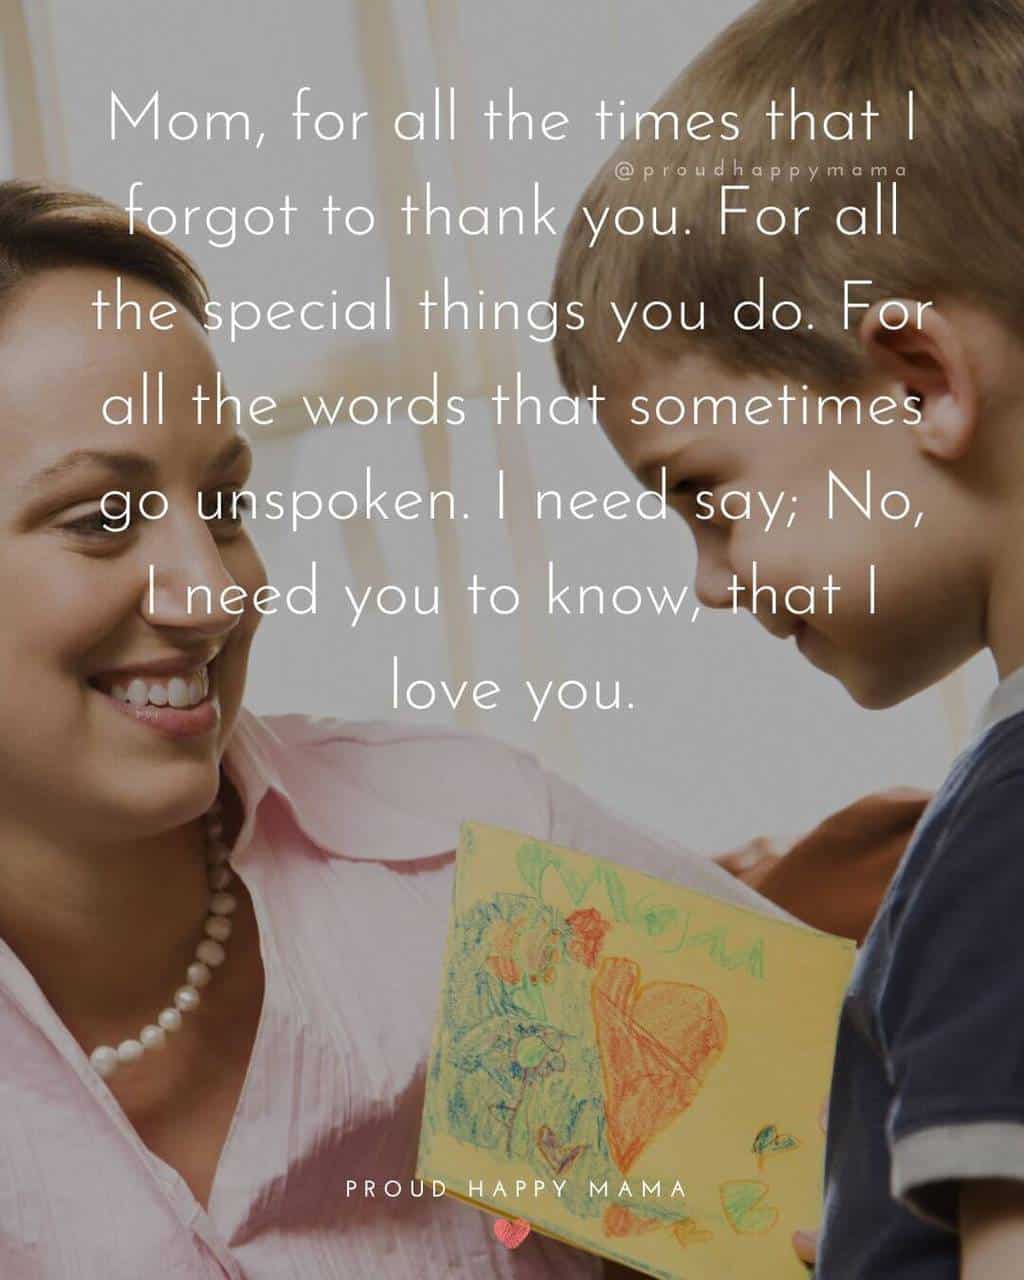 Happy Mothers Day Sayings | Mom, for all the times that I forgot to thank you. For all the special things you do. For all the words that sometimes go unspoken. I need say; No, I need you to know, that I love you.